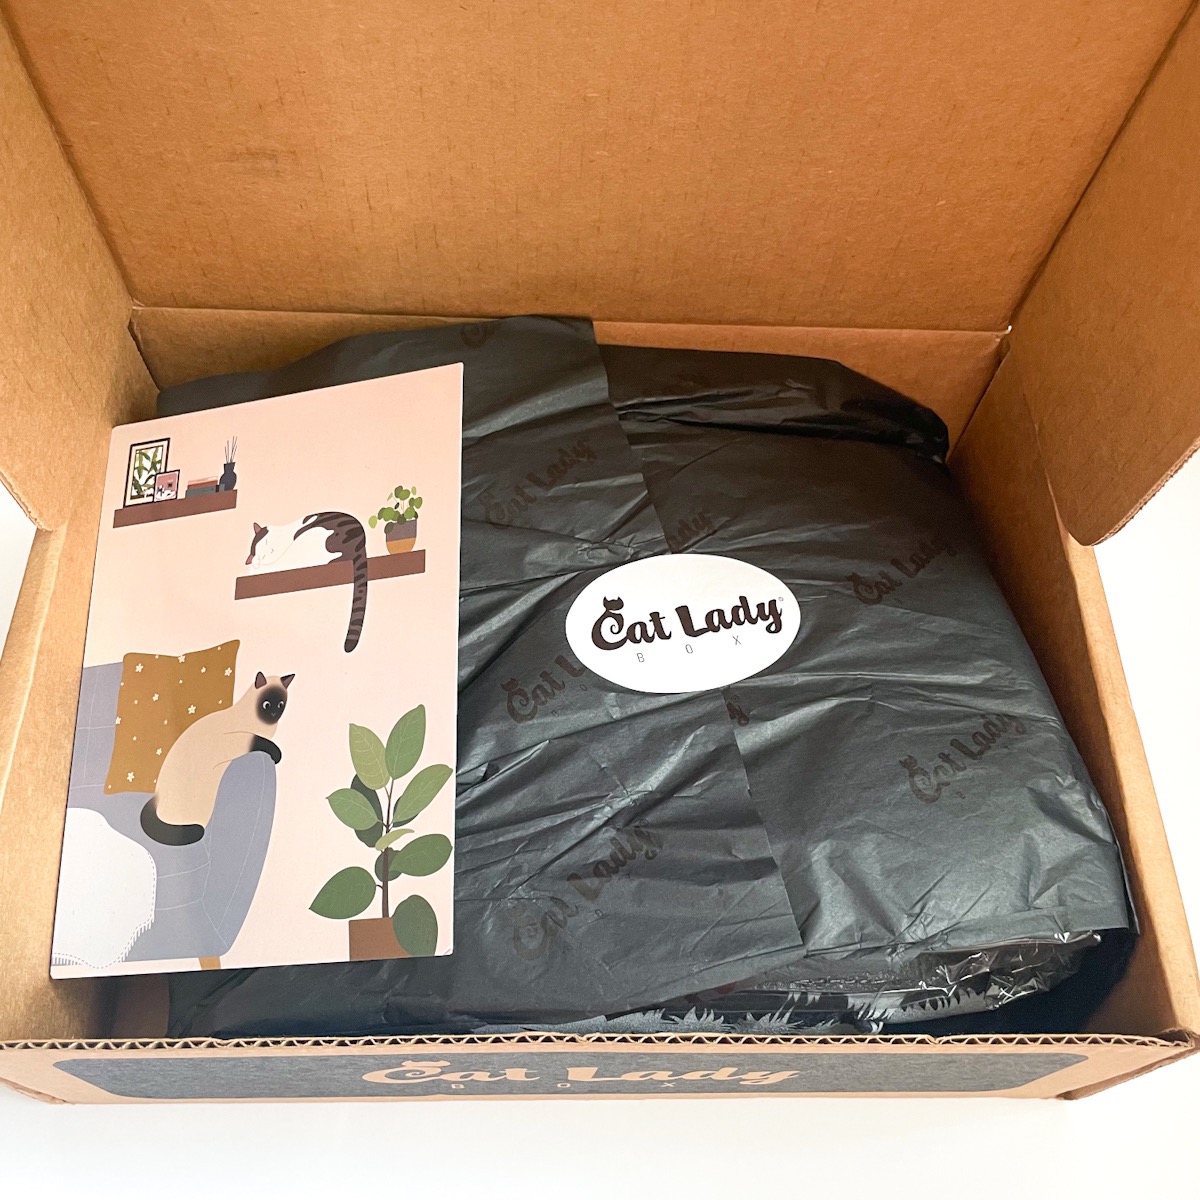 Cat Lady Box Subscription September 2022 Review